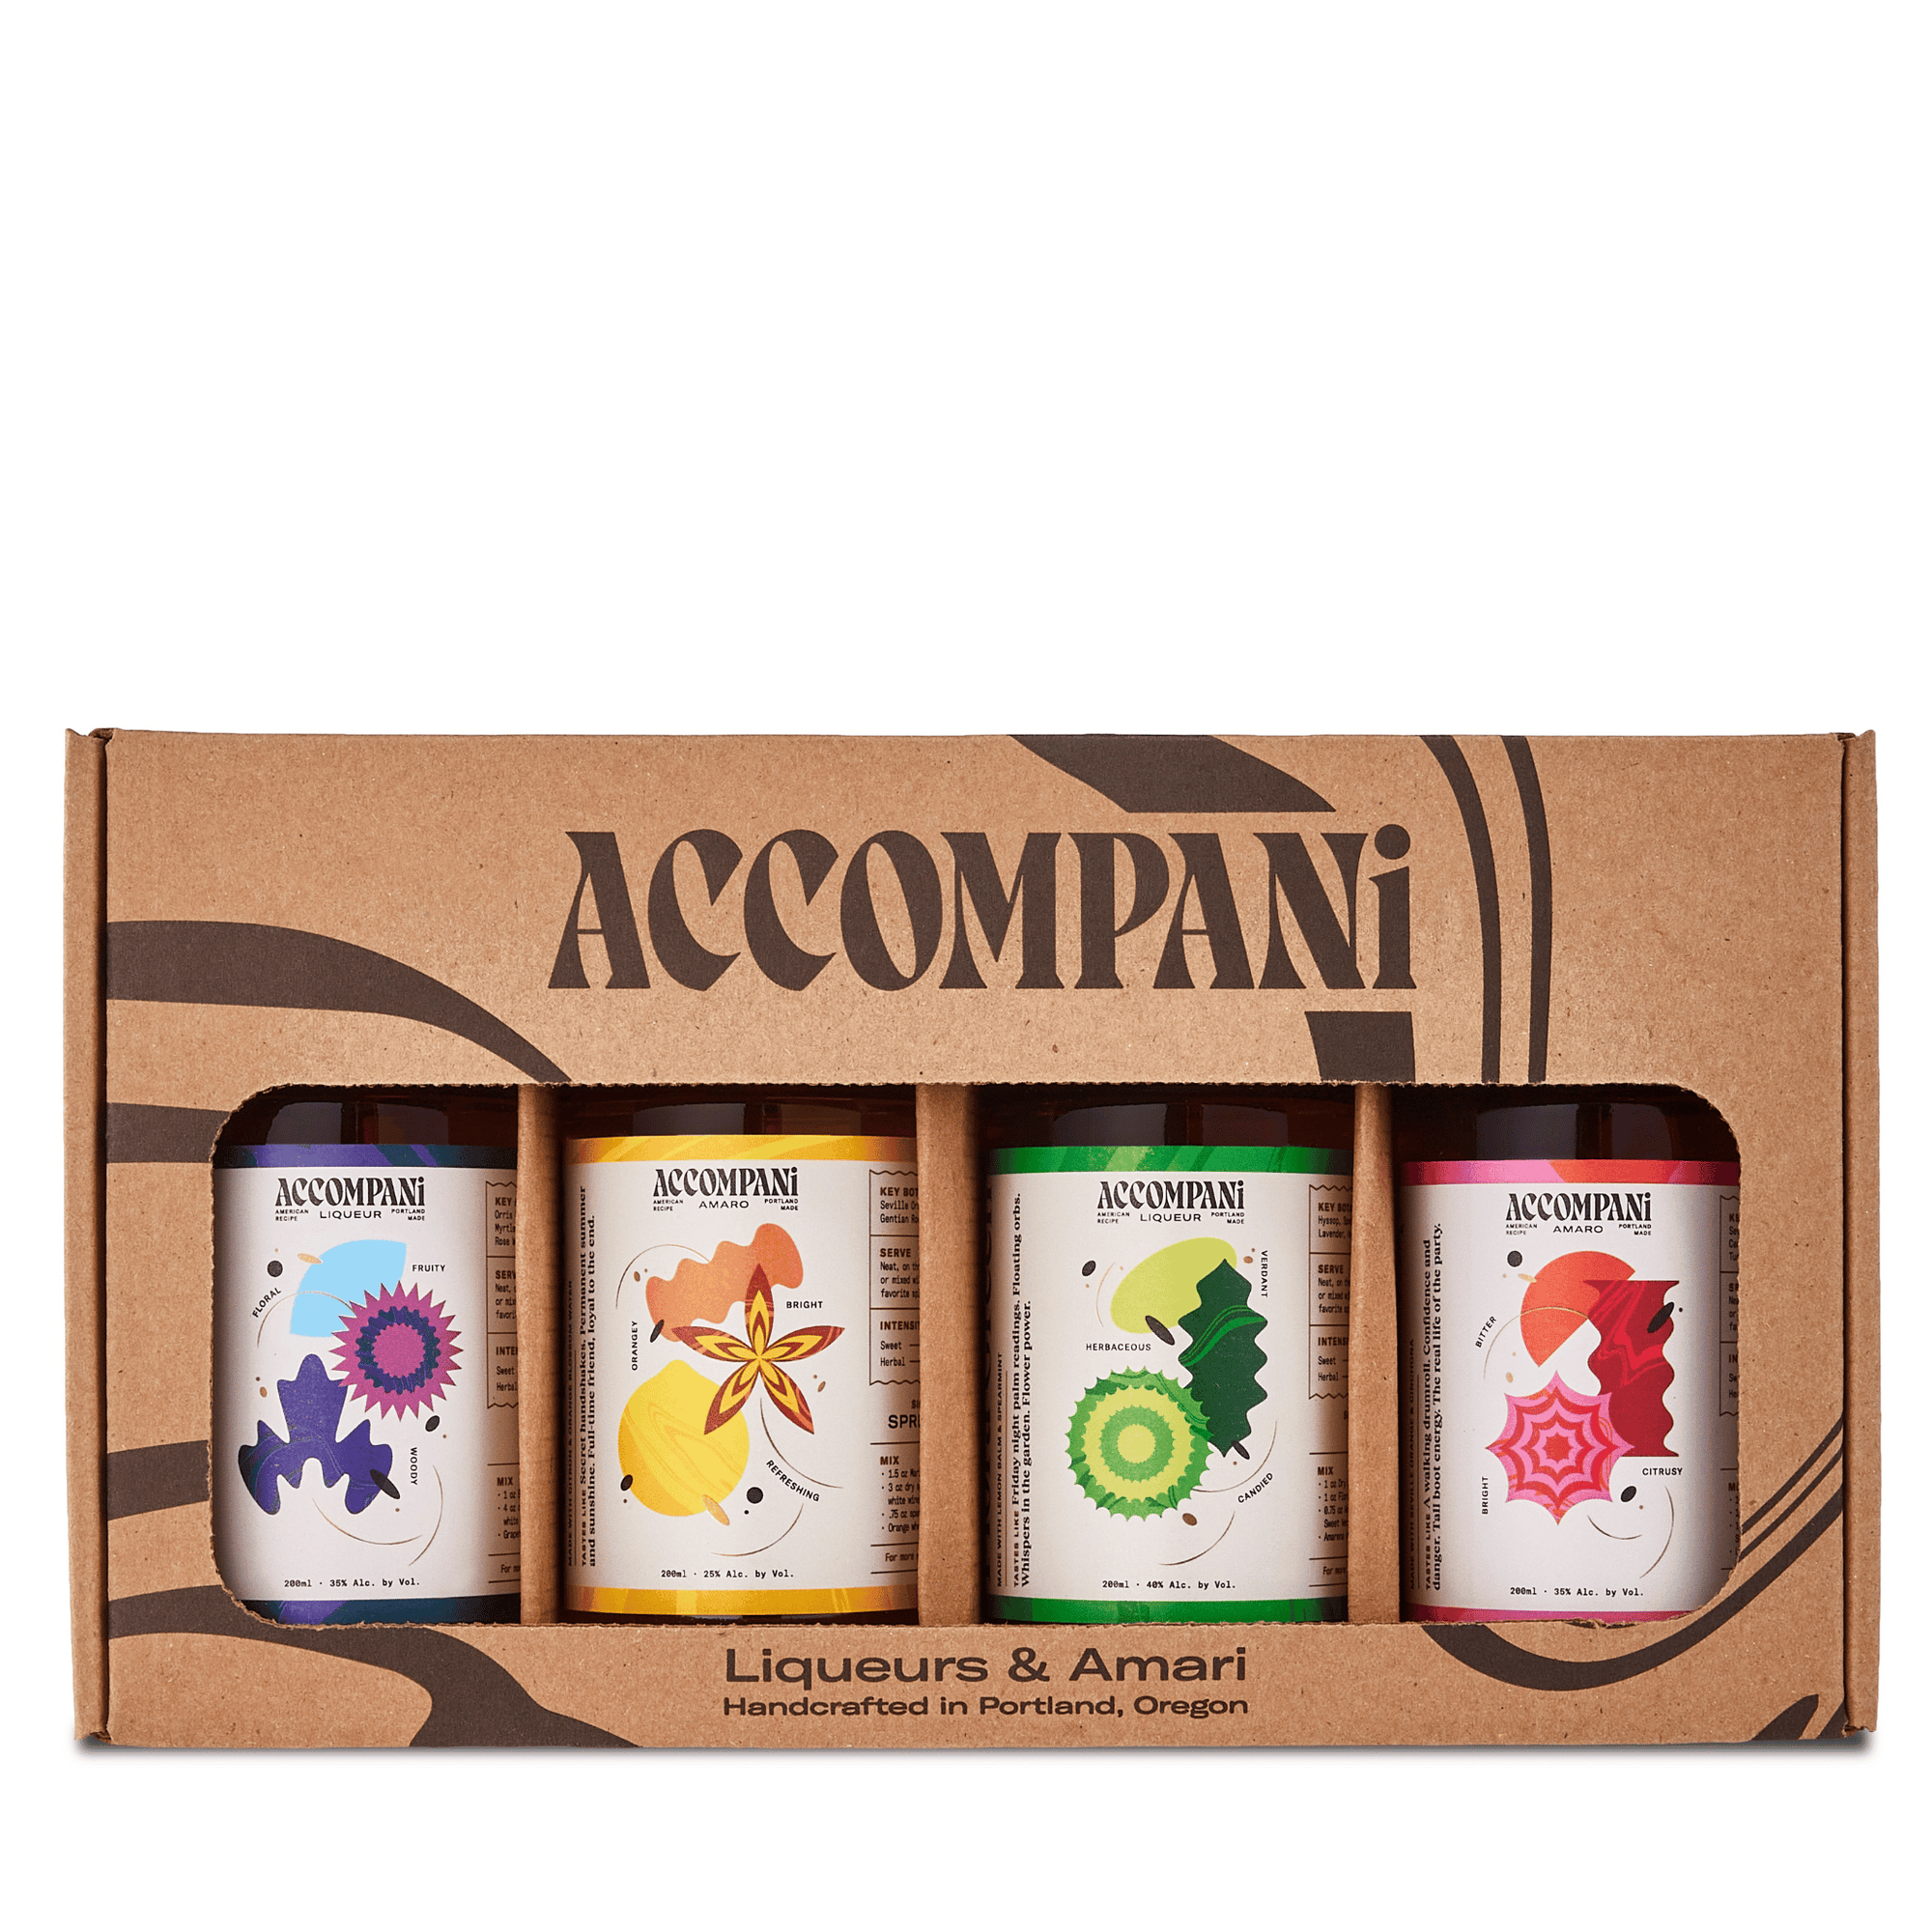 Accompani Gift Pack includes a 200ml bottle of blue Dorris, Mari gold, flora green, and crimson snap